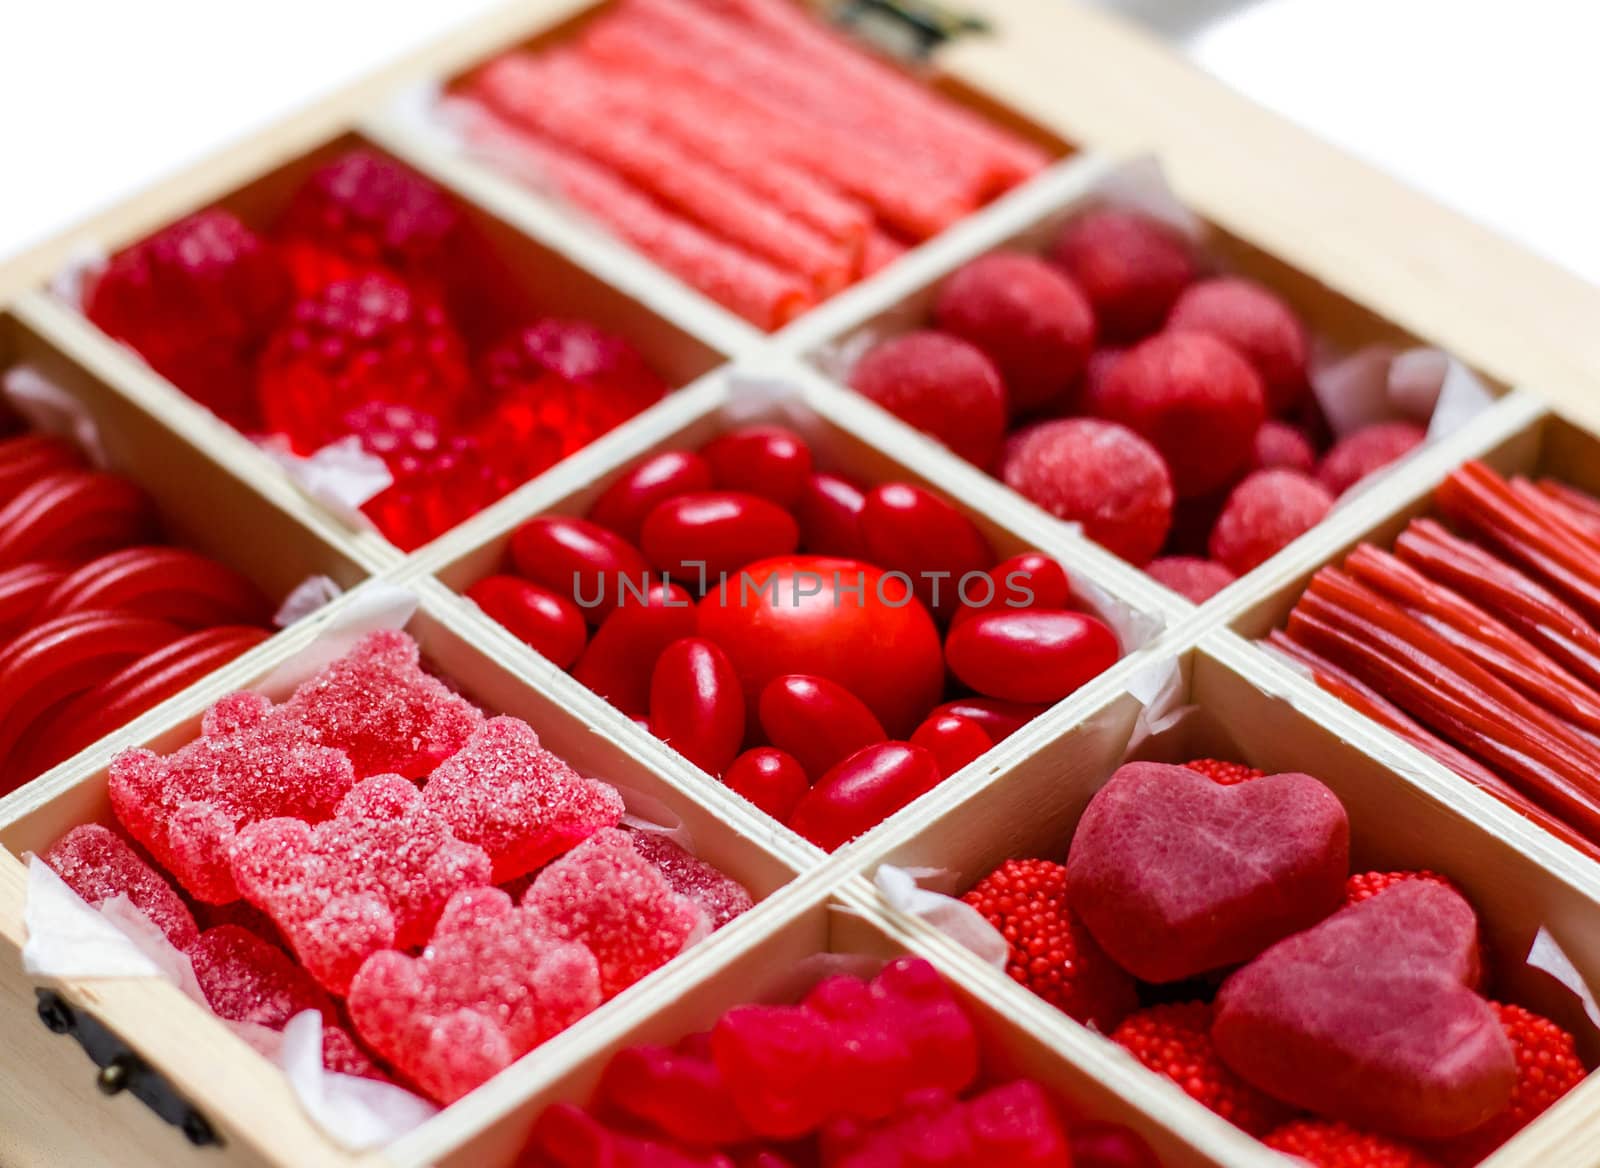 Nine candy varieties inside a wooden box